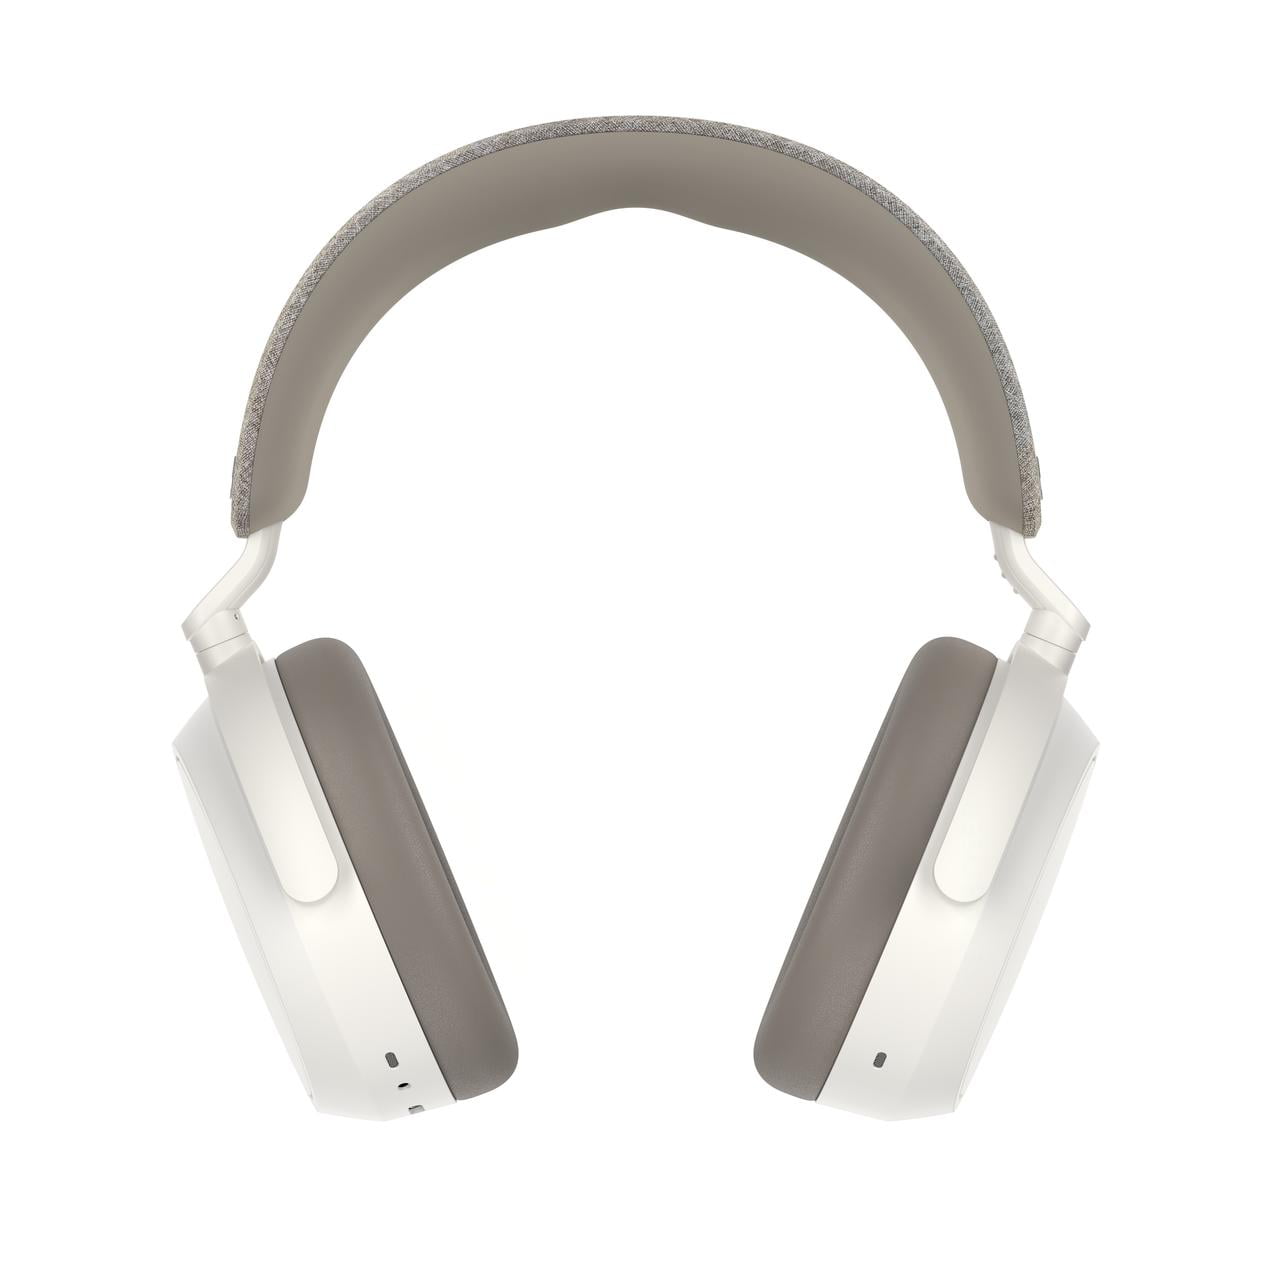 Momentum 4 Wireless Headphones - Bluetooth Headset for Crystal-Clear Calls with Adaptive Noise Battery Life Customizable Sound, White - Walmart.com